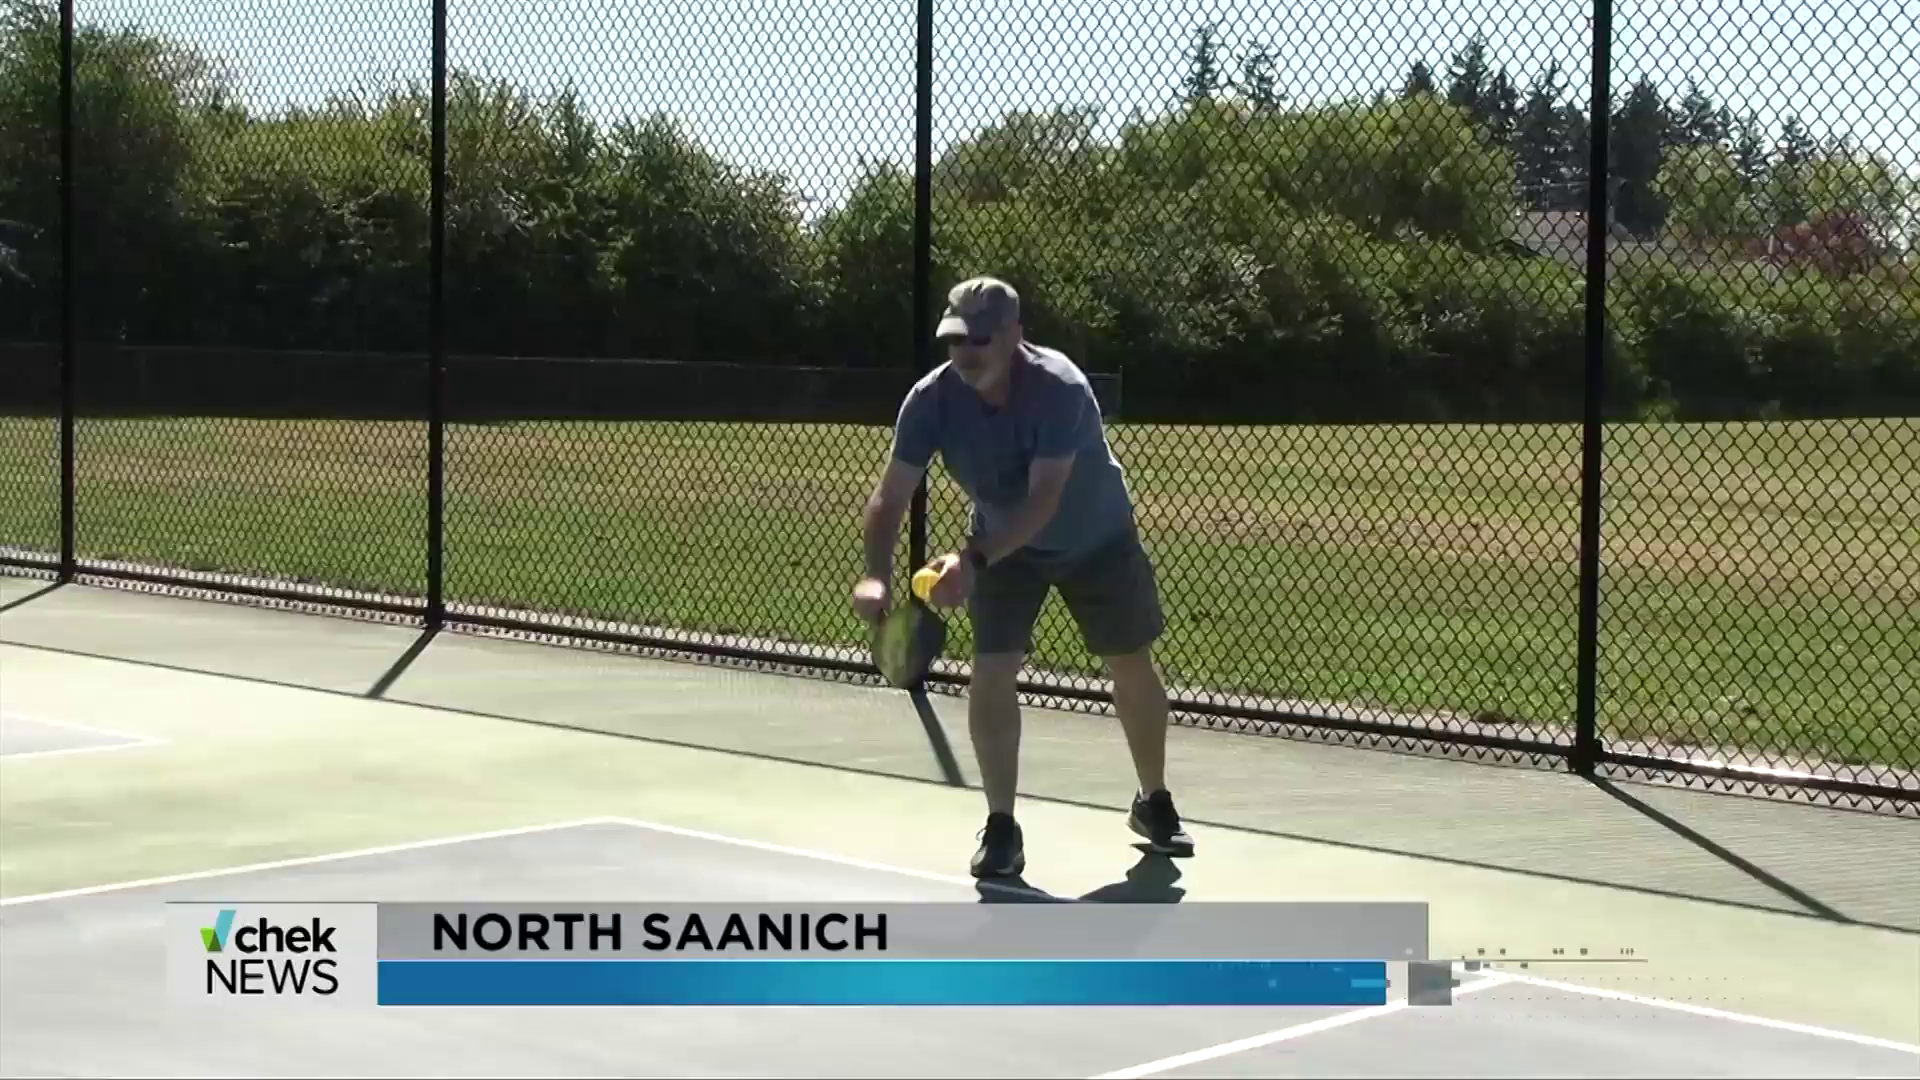 'This is not a snap decision': North Saanich votes to close Wain Park pickleball courts.